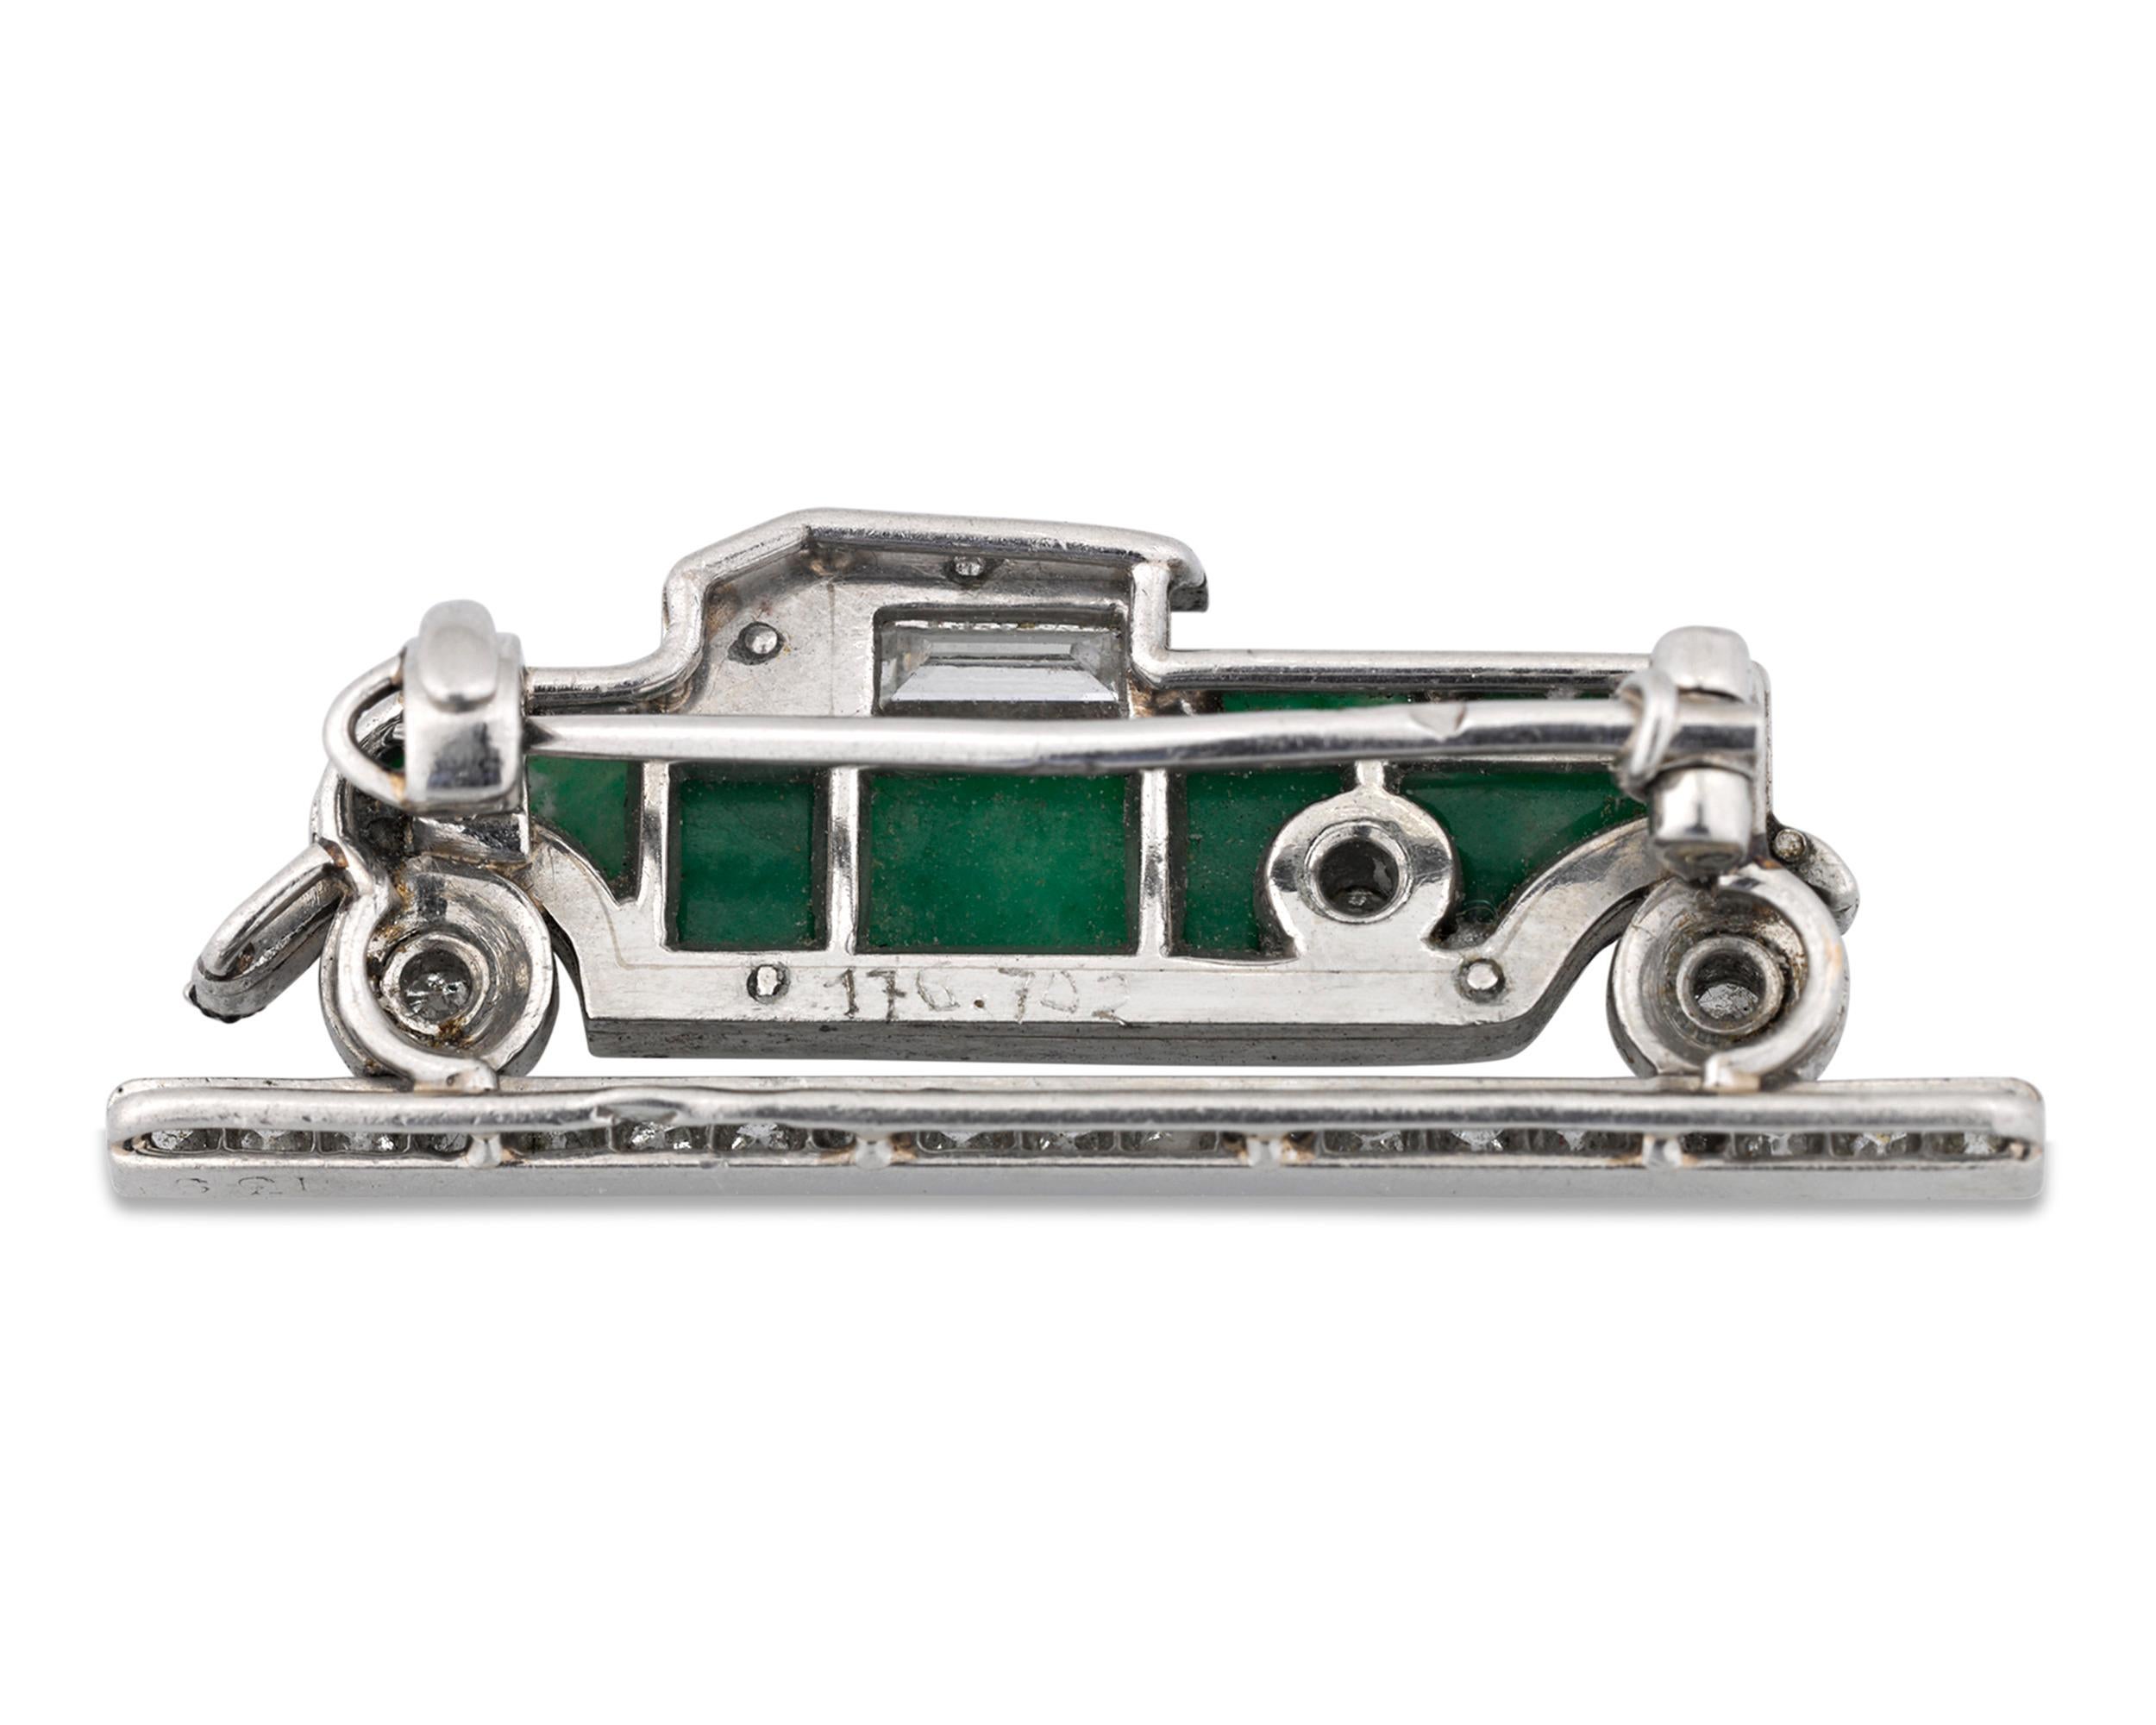 Cartier created this rare and fabulous brooch depicting a luxurious 1920s-era Rolls Royce convertible. The brooch is a study in elegance, wrought from deep green jade, diamonds and onyx all set in platinum. Cartier is one of the most esteemed